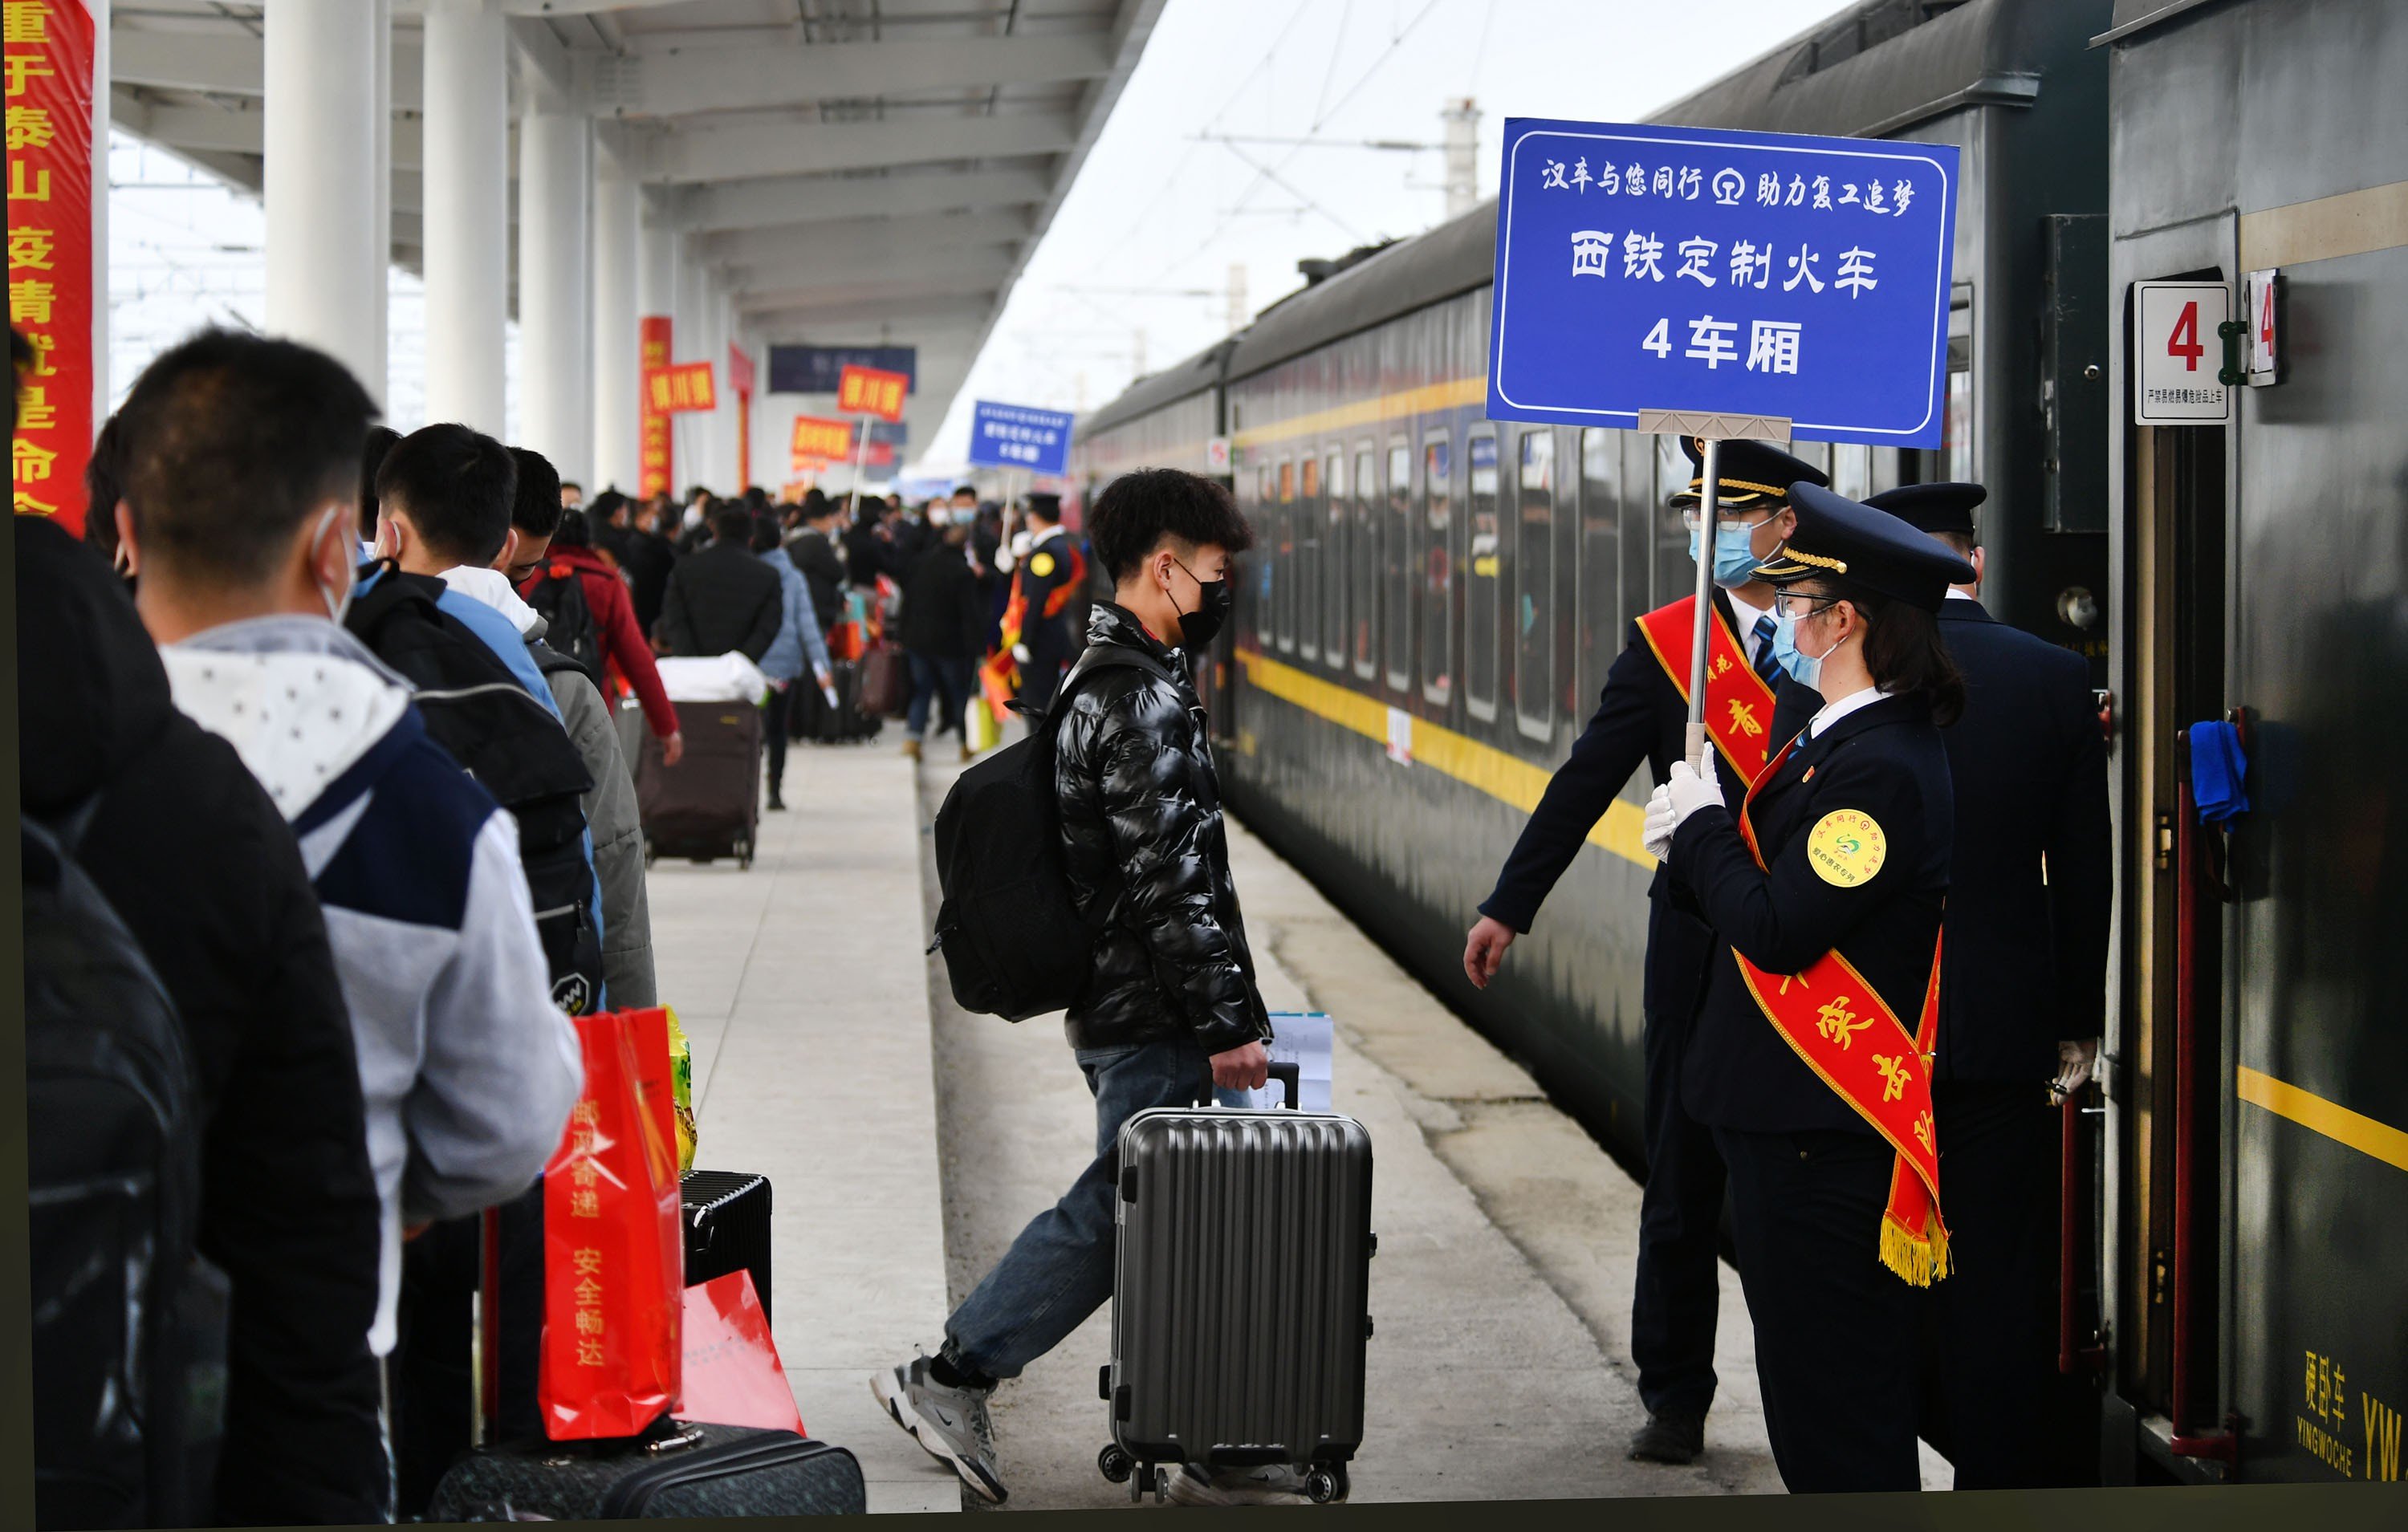 Migrant workers board special trains to return to their jobs in the cities as China tries to get back to normality. Photo: Xinhua